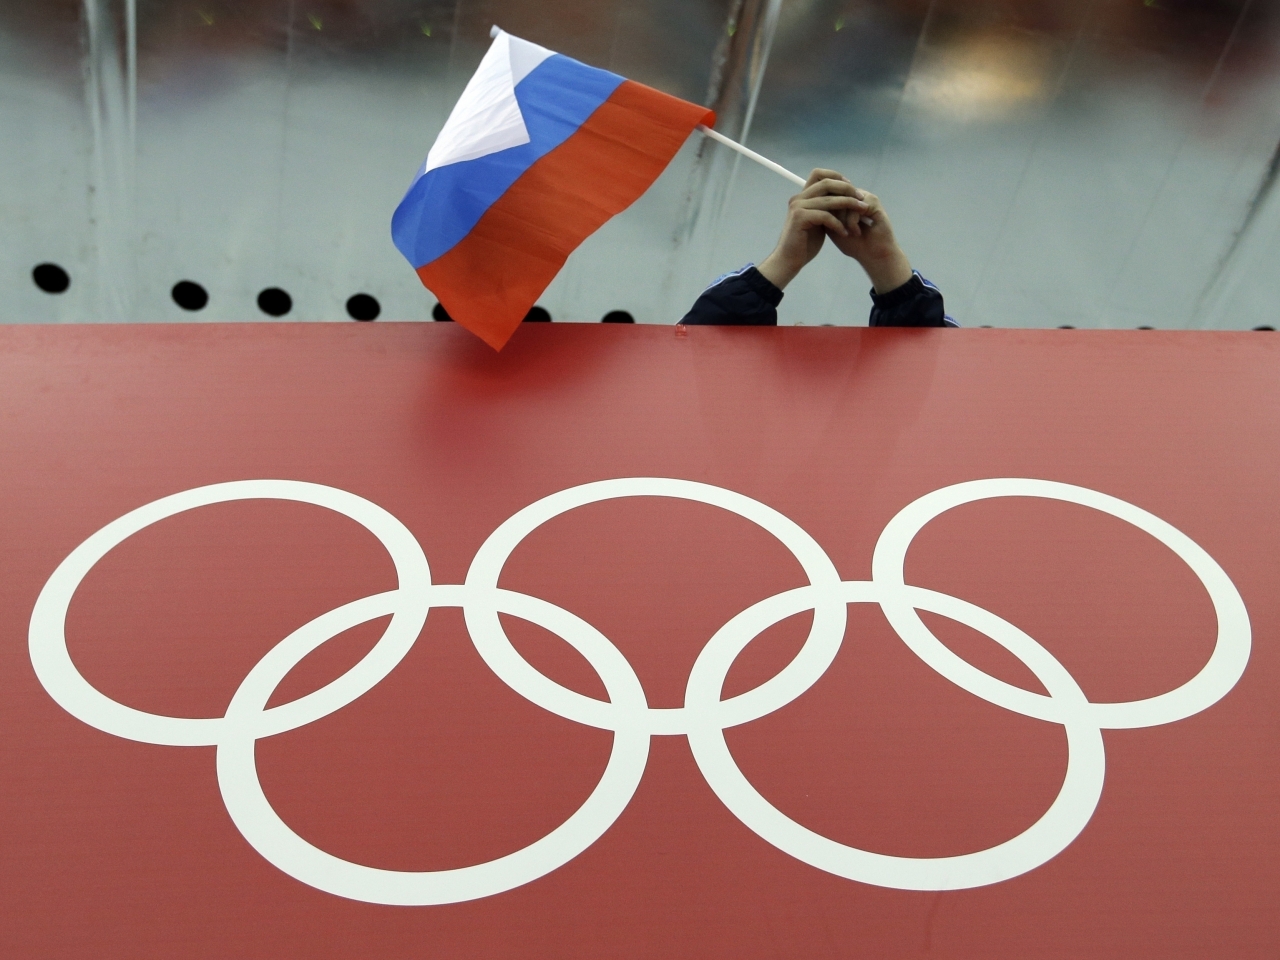 Russia has once again been accused of allowing its athletes to use performance enhancing drugs, image via AP